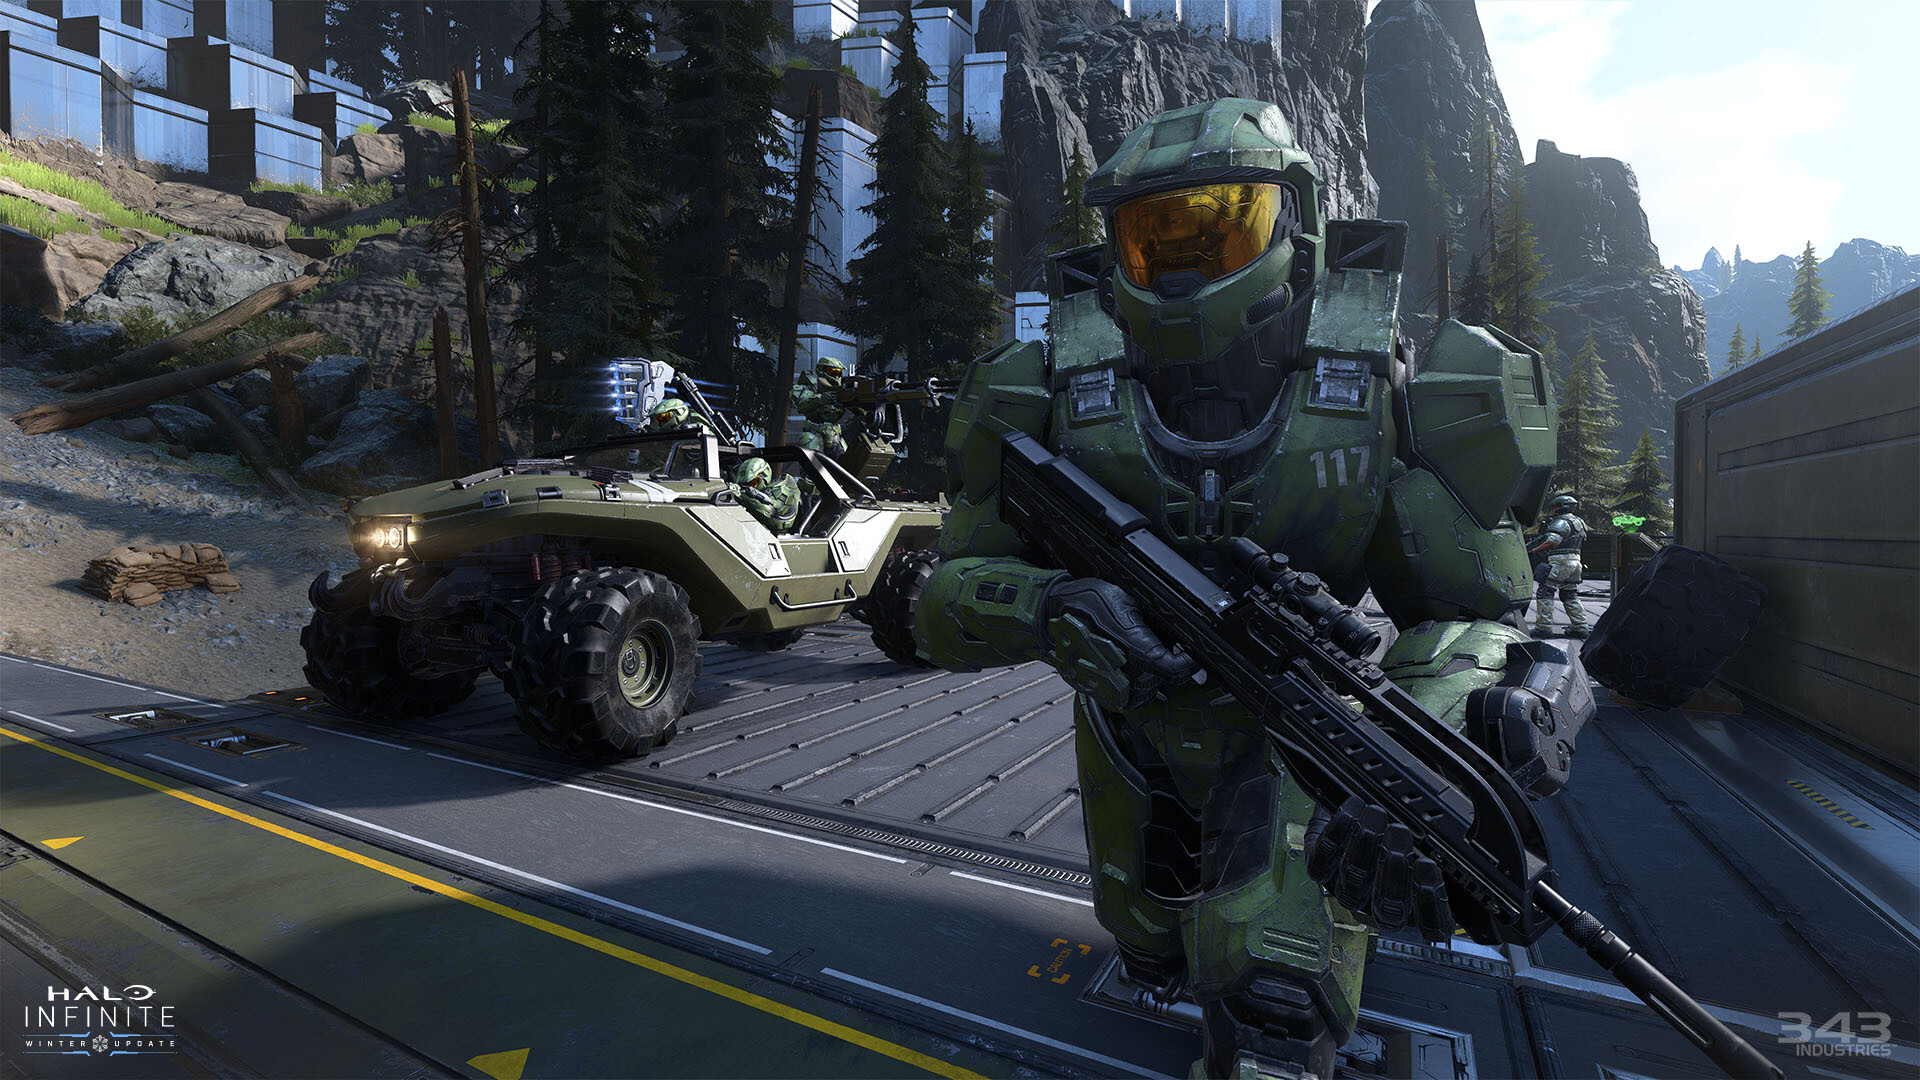 Is Halo Infinite free? Xbox Game Pass news for campaign